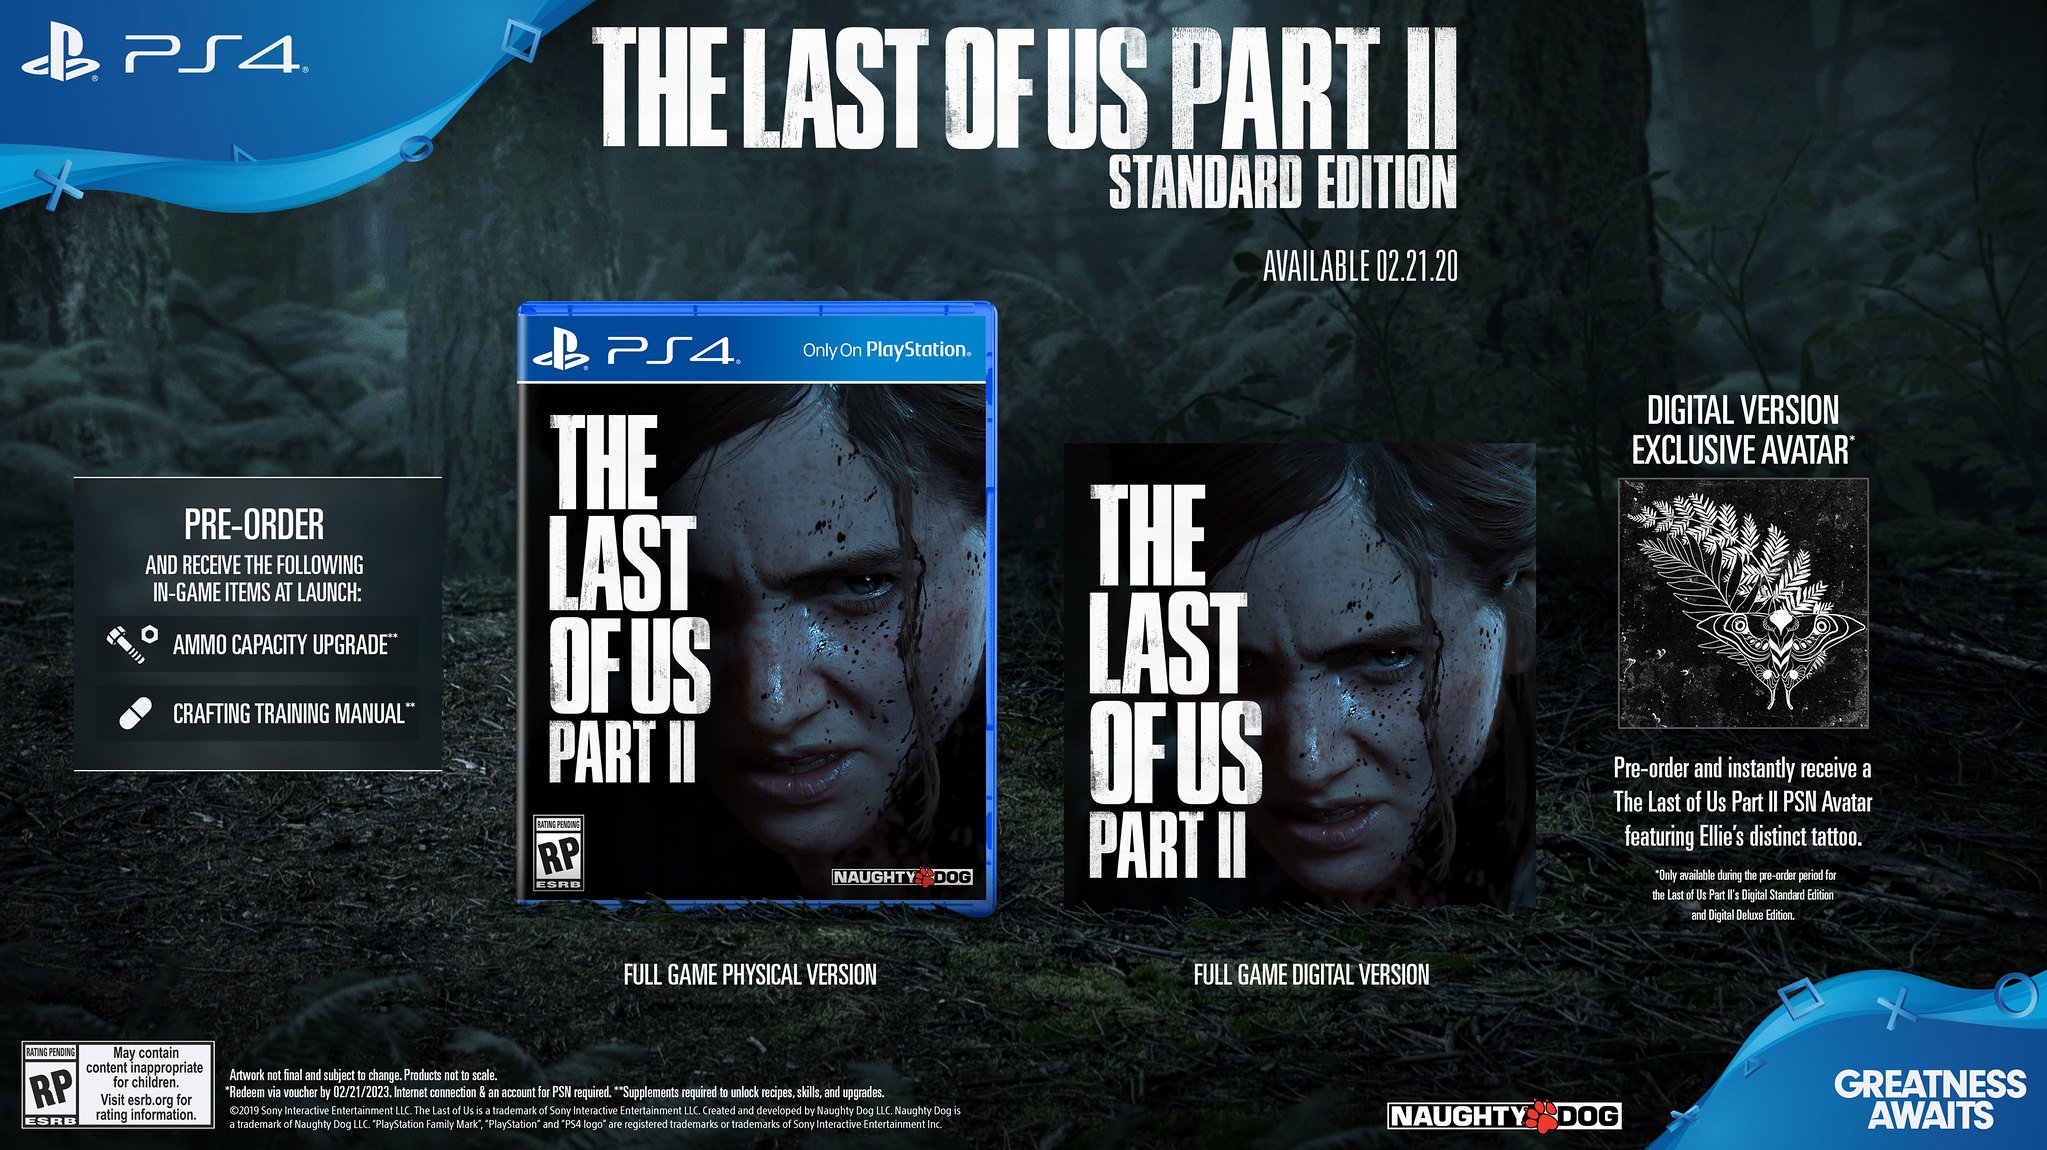 Sony PS4 The Last of Us Part II Ellie Edition Video Game 3004287 - US